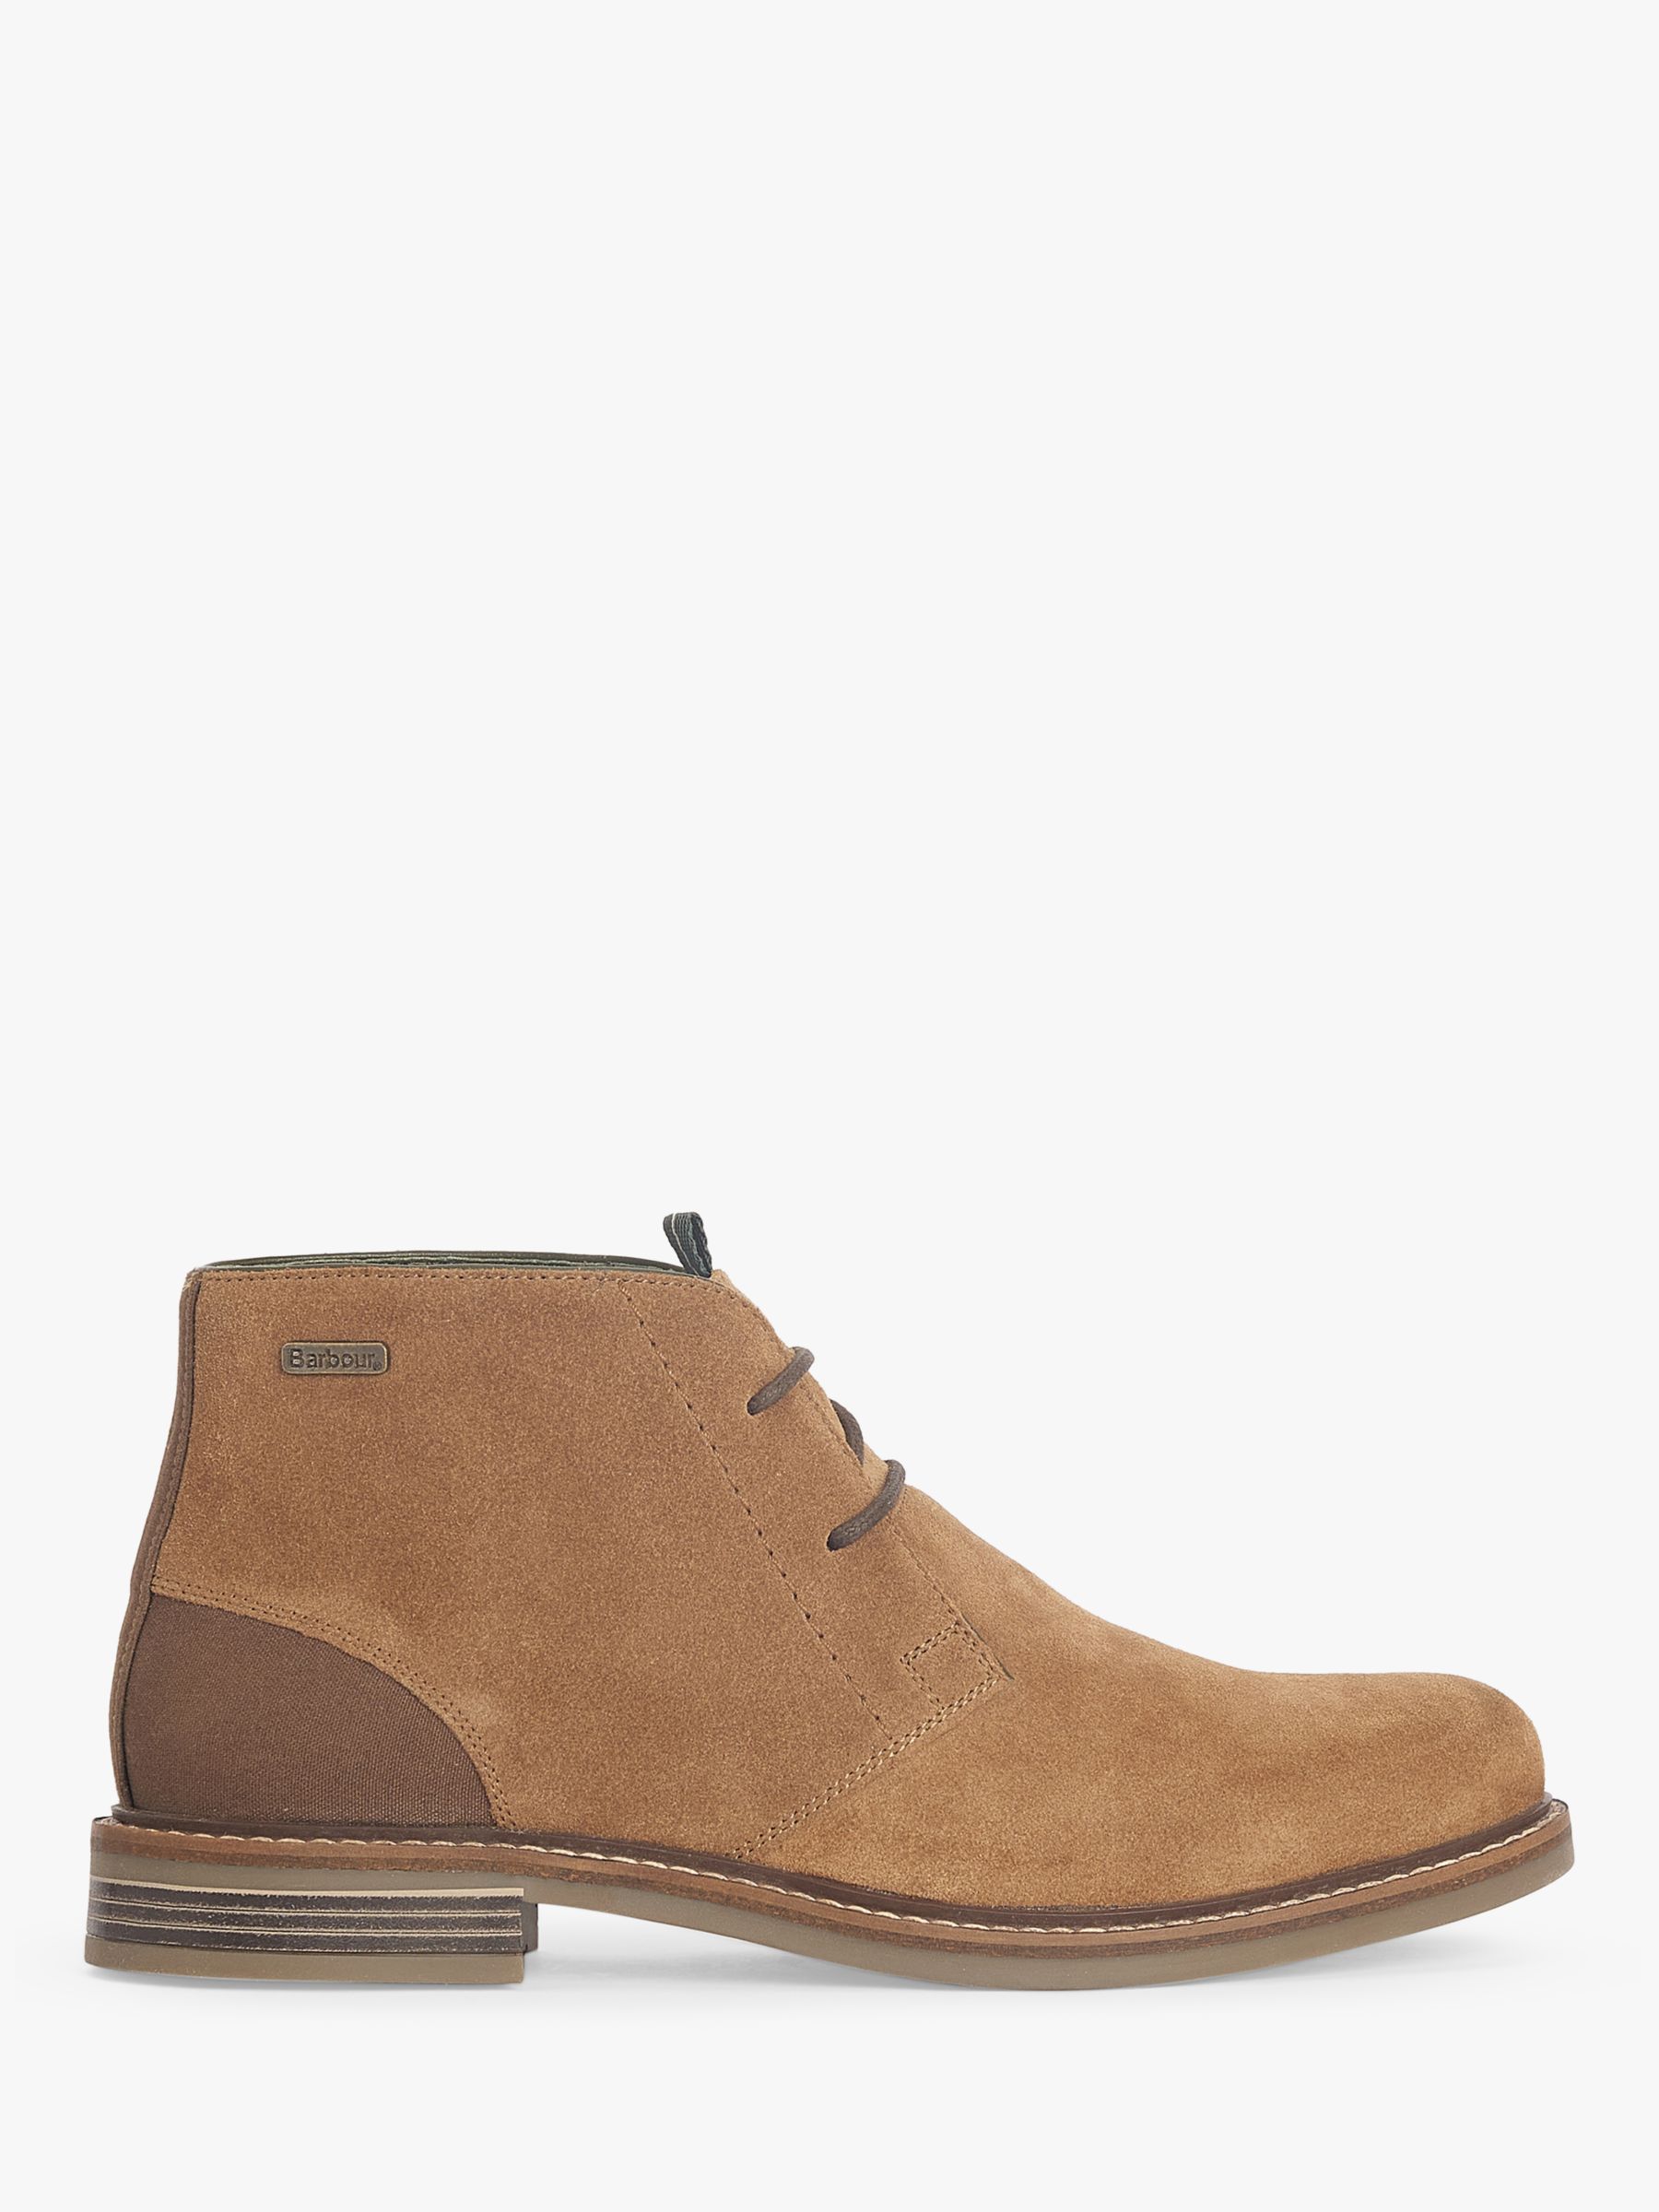 Barbour Readhead Chukka Fawn Suede Boots, Fawn Suede, 7